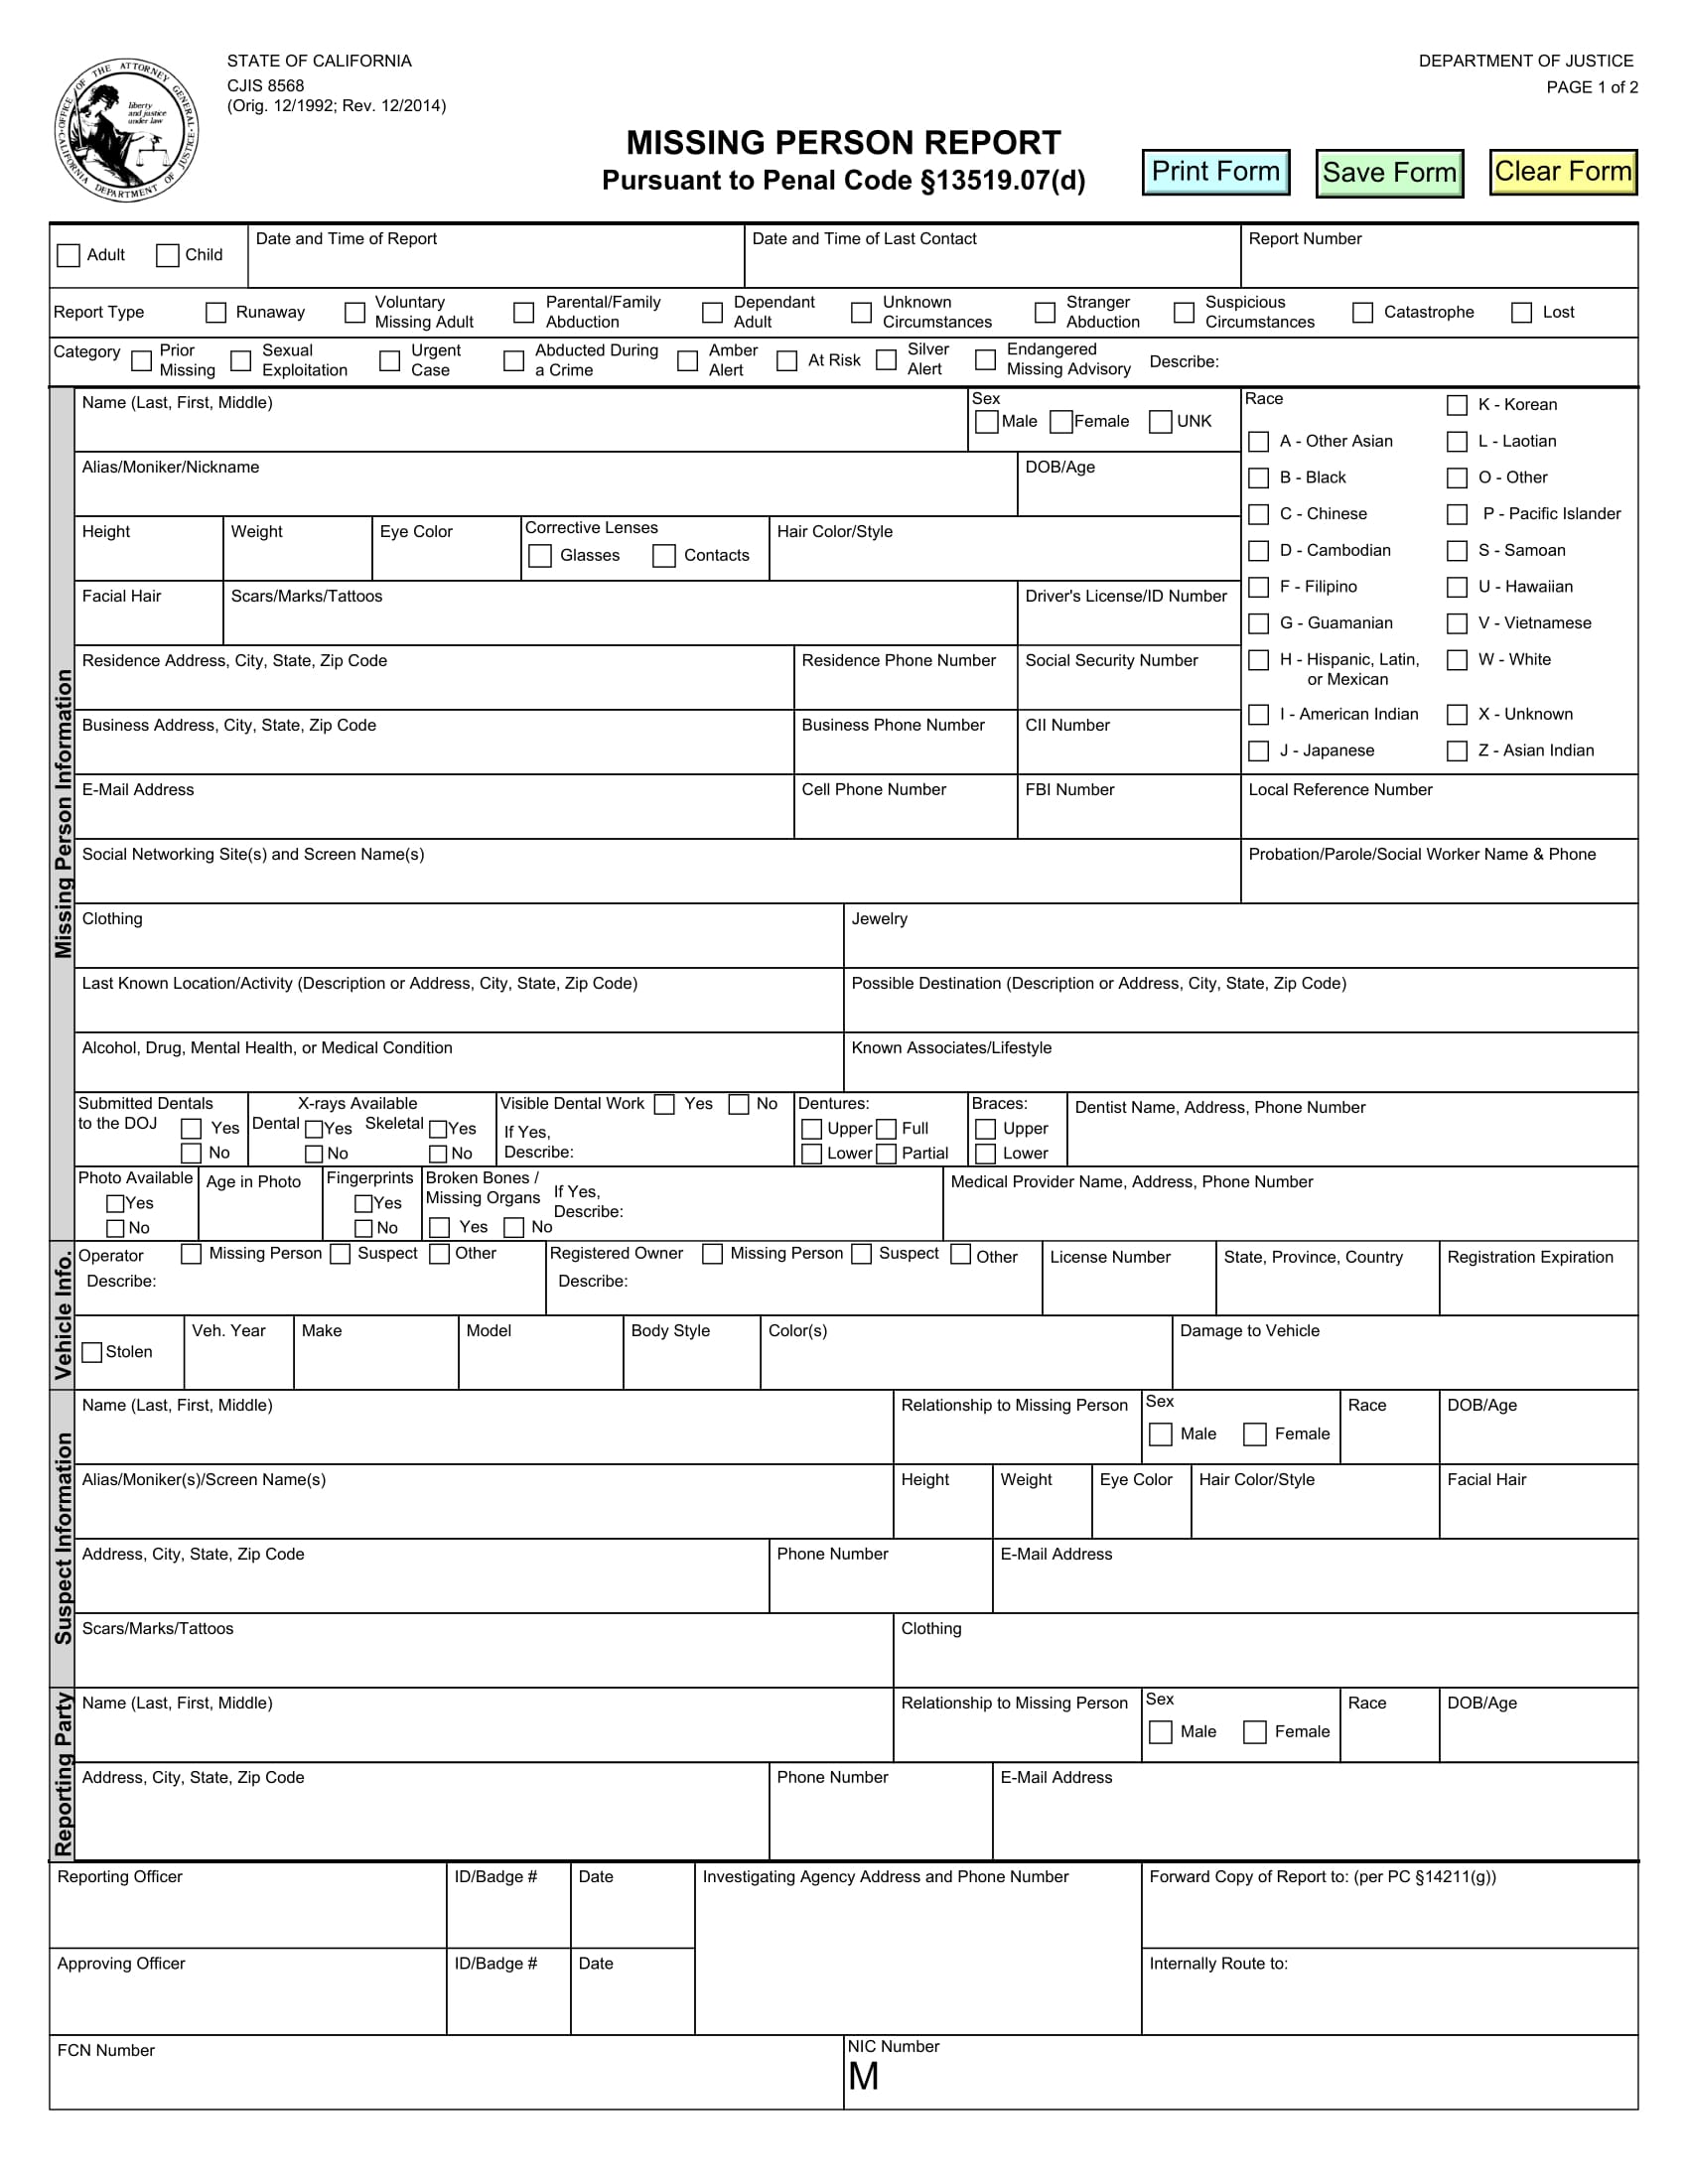 detailed missing report form 1